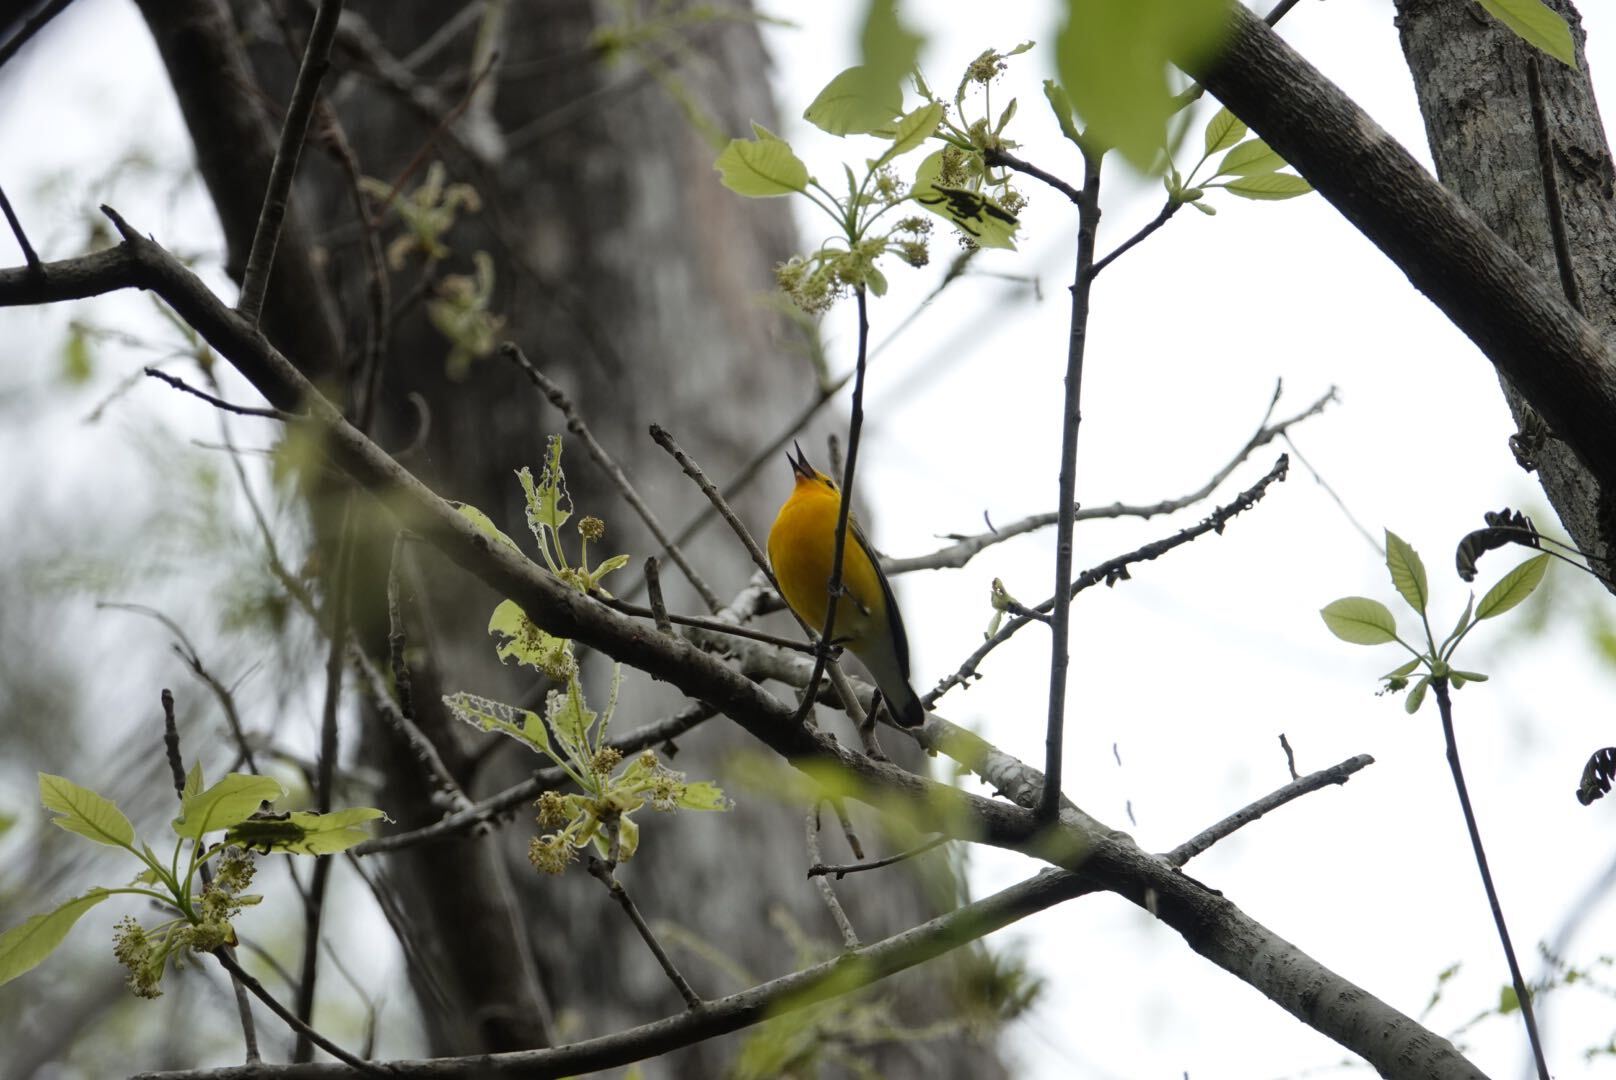 First recorded Prothonotary Warbler of 2023, a male bright yellow perched high in a tree singing. 